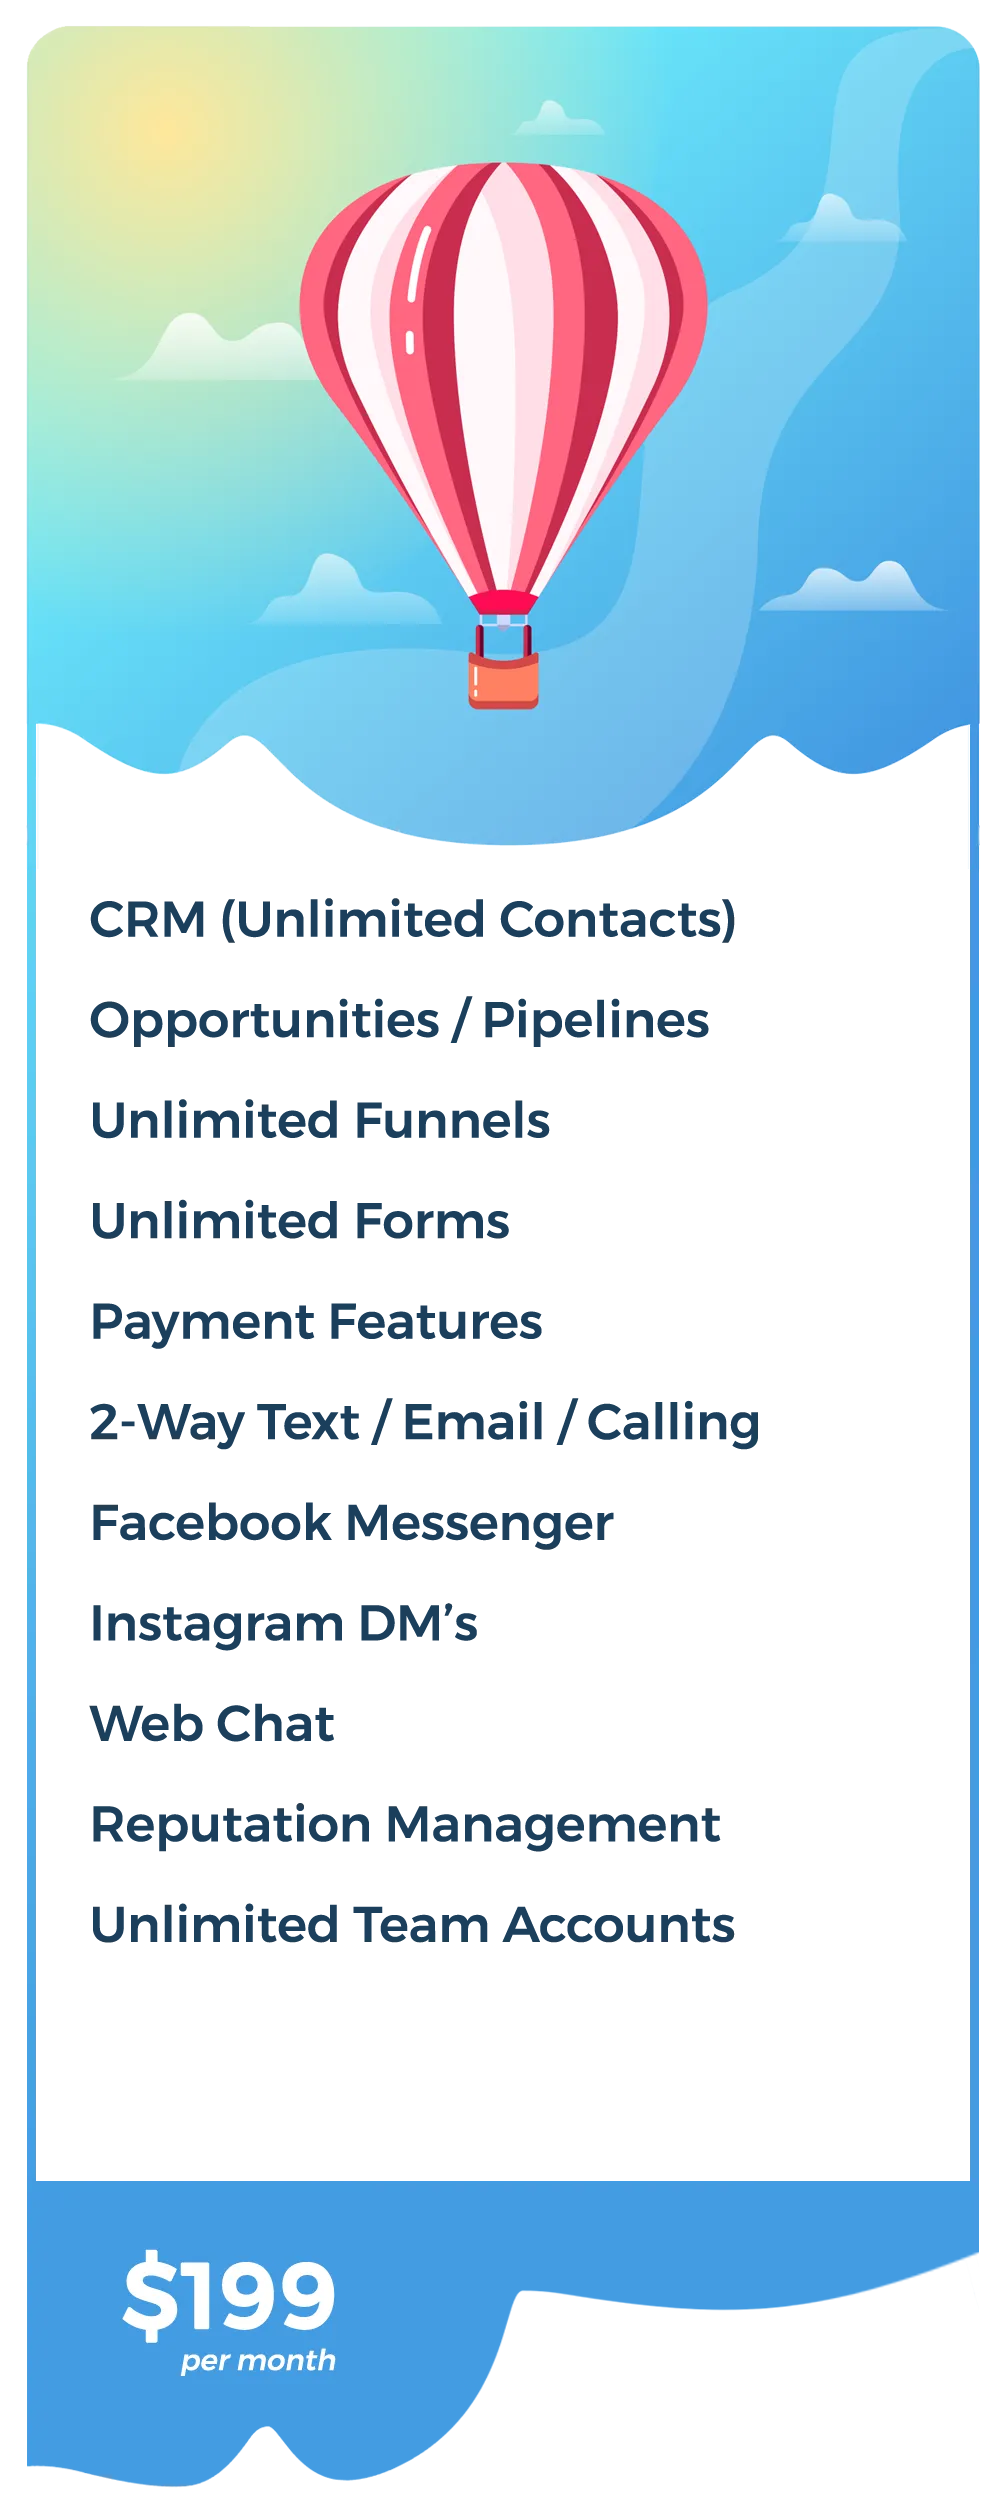 LeadLenz Basic Tier - CRM (Unlimited Contacts), Pipelines, Unlimited Funnels, Unlimited Forms, Payment Features - $199 /month